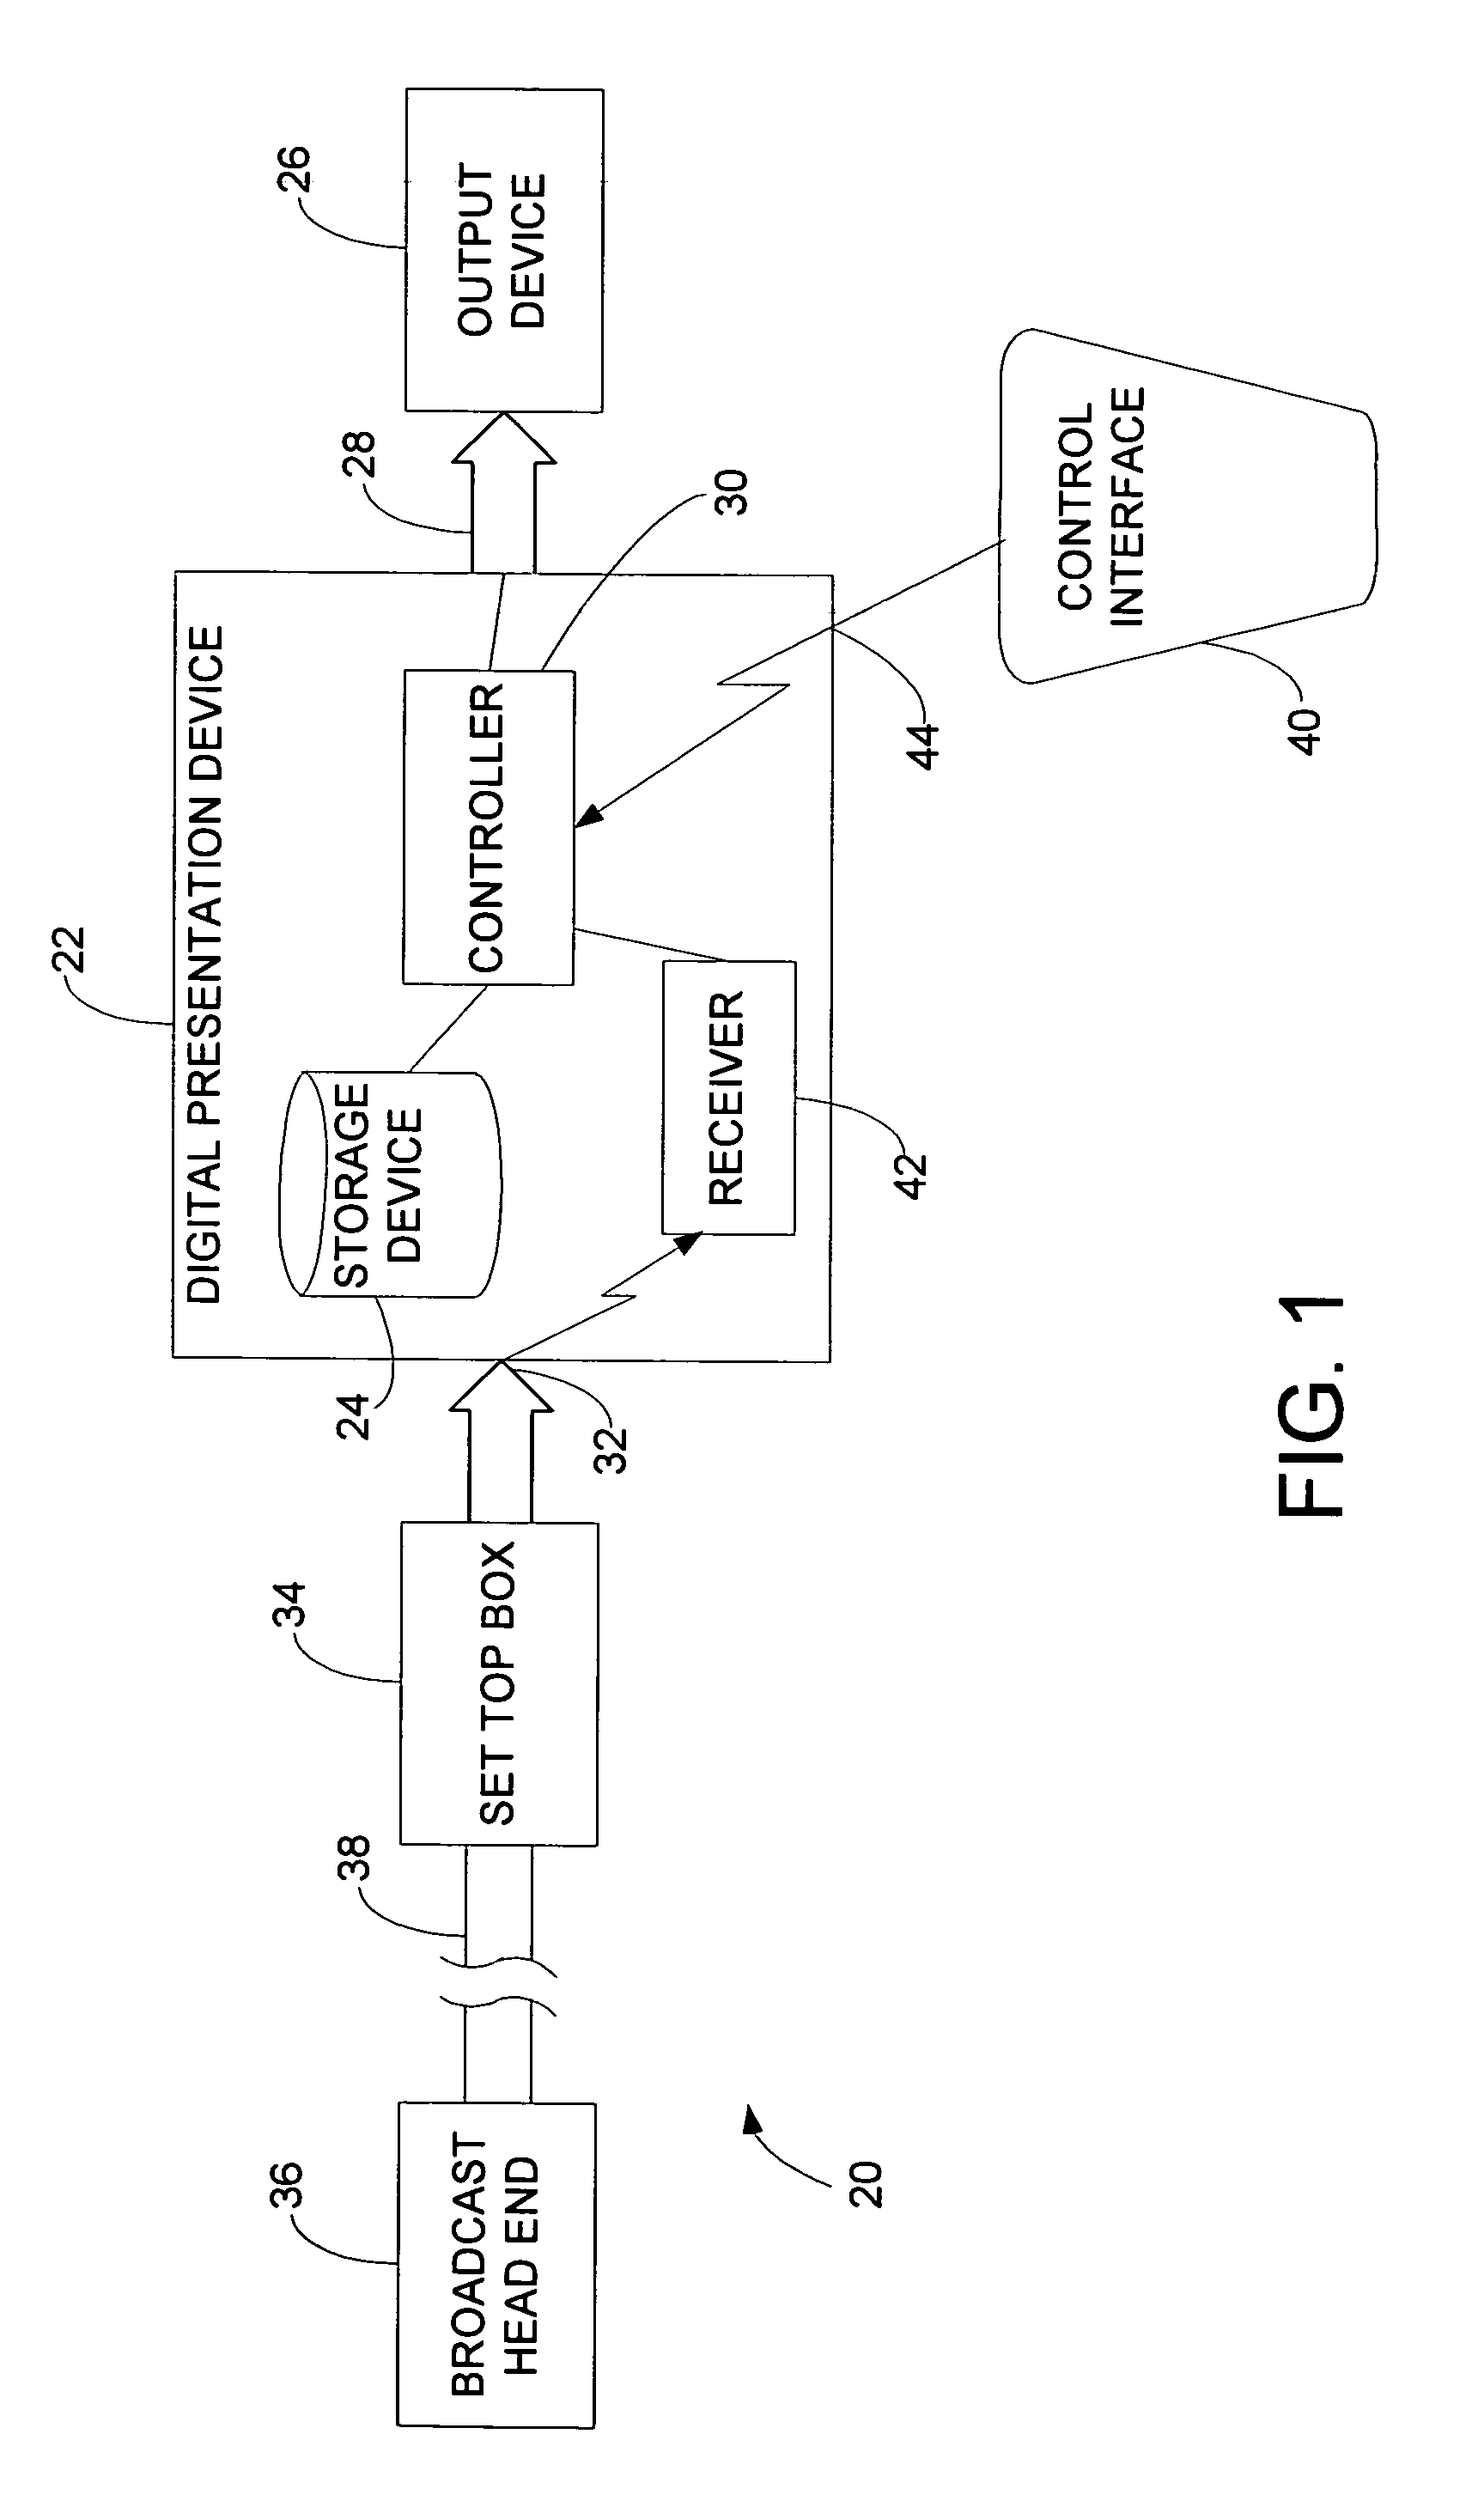 System and method for ensuring presentation of embedded rich media across station boundaries